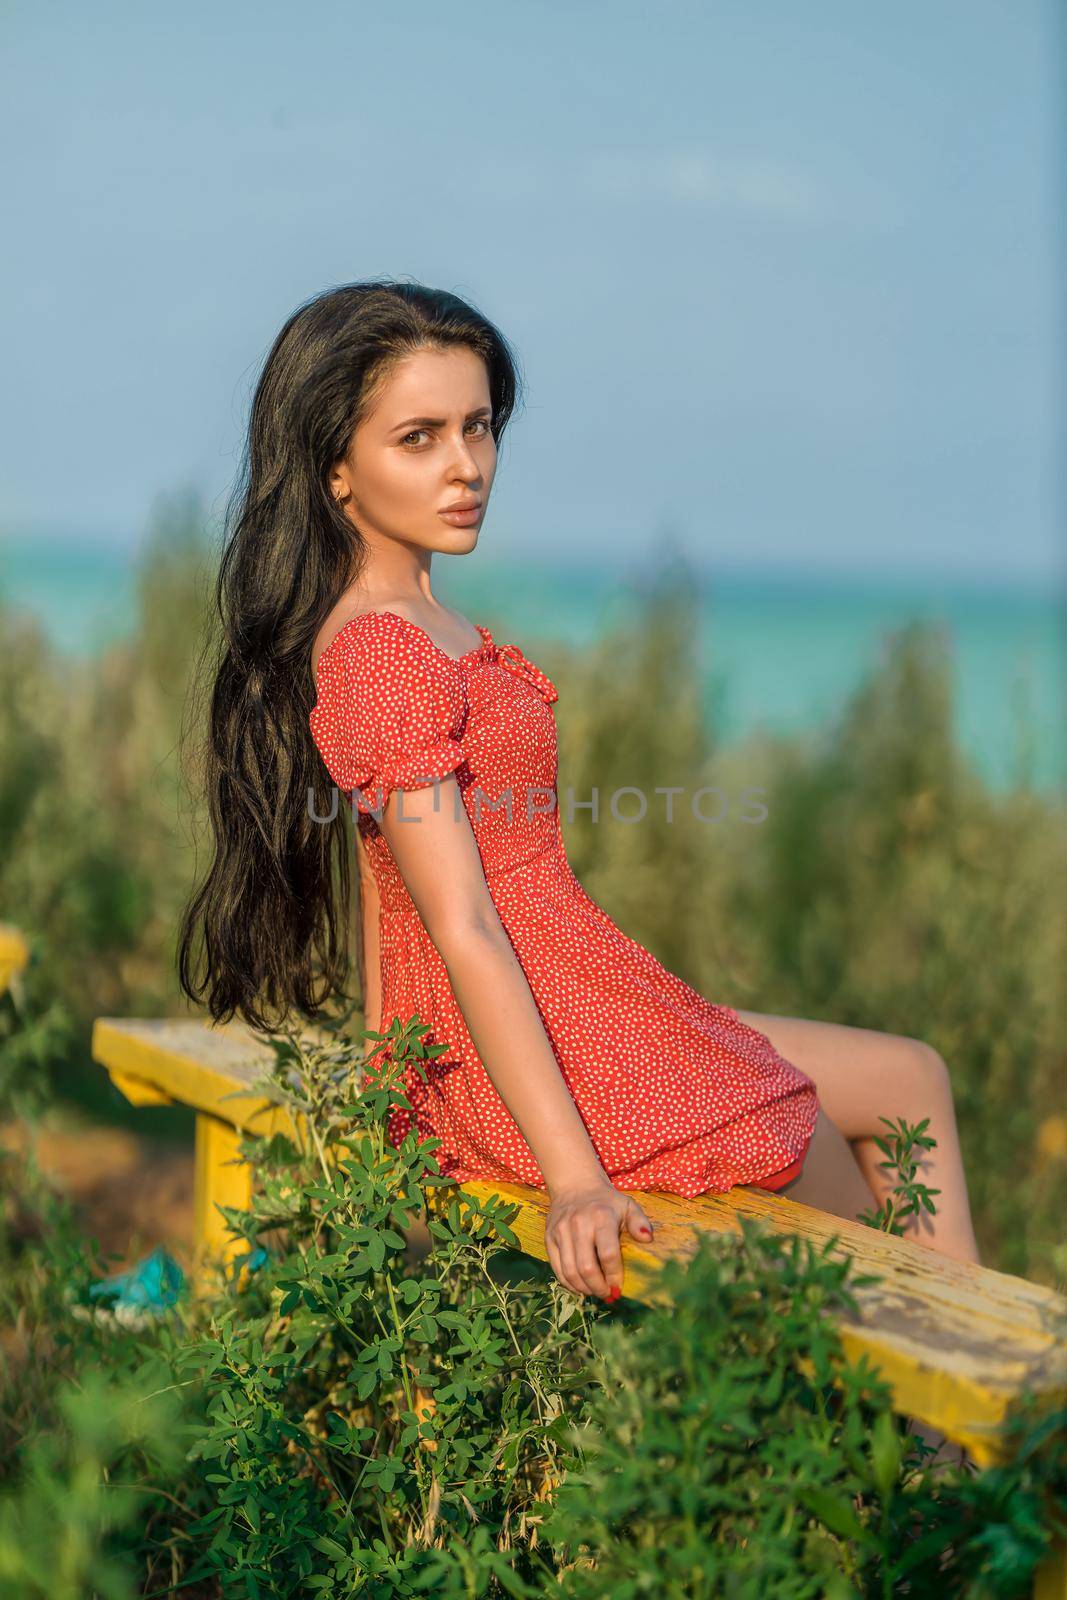 Girl in a red dress with polka dots sits on a bench overlooking the sea by but_photo